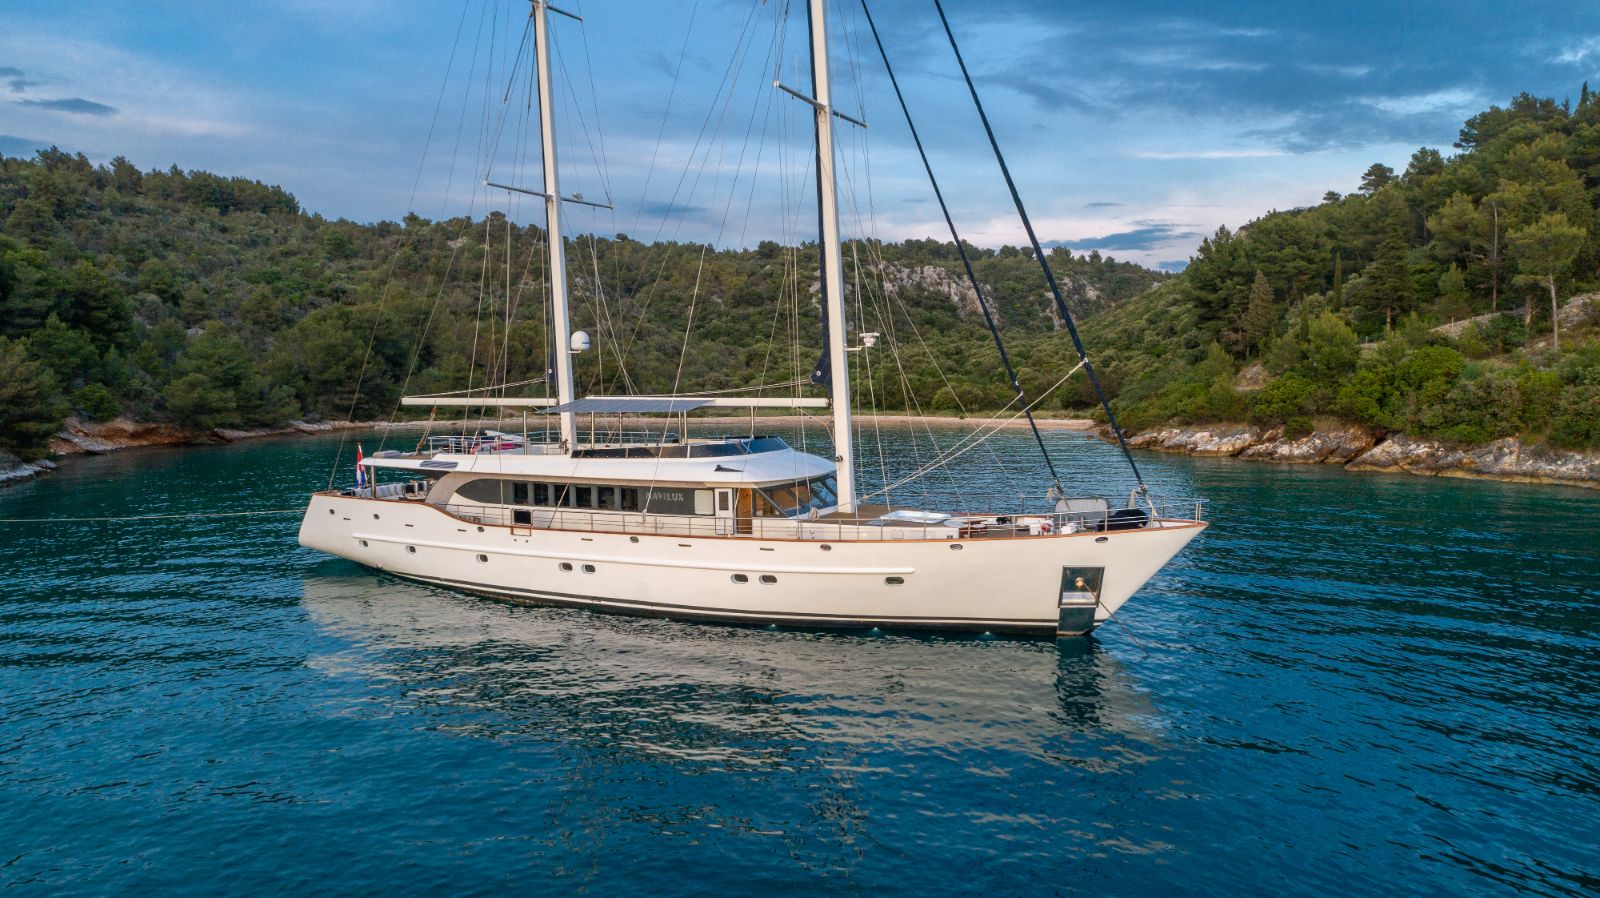 Exterior view of the Navilux gulet in Croatia